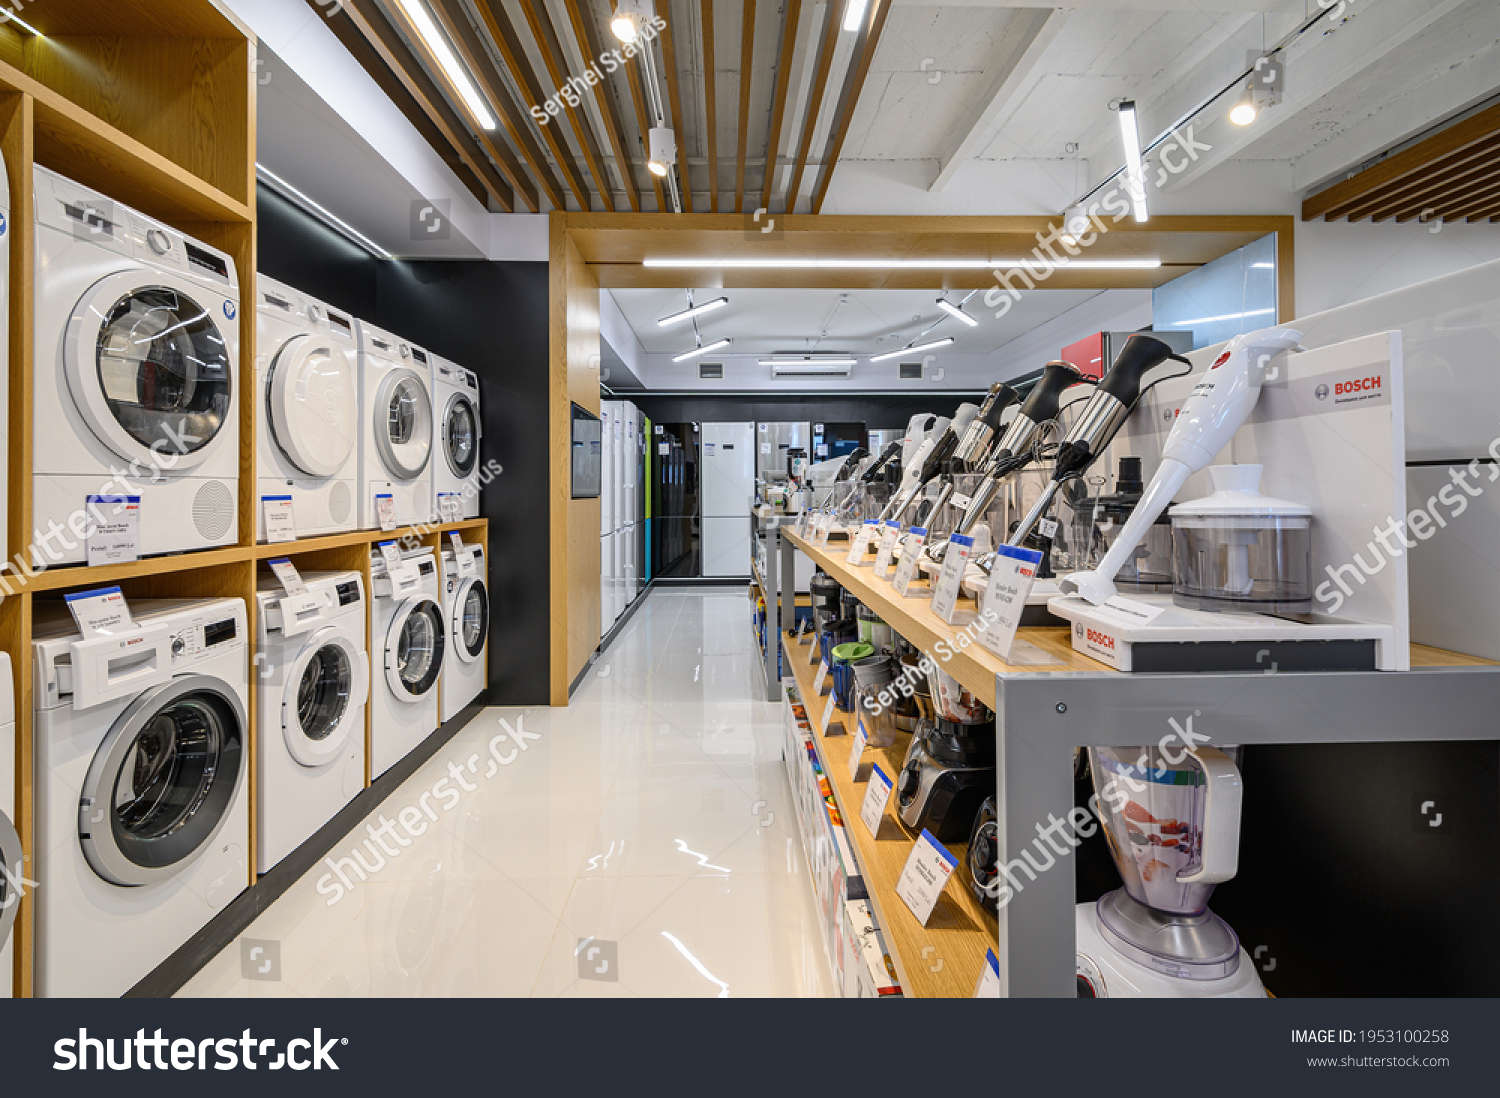 4,488 Home appliance mall Stock Photos, Images & Photography | Shutterstock